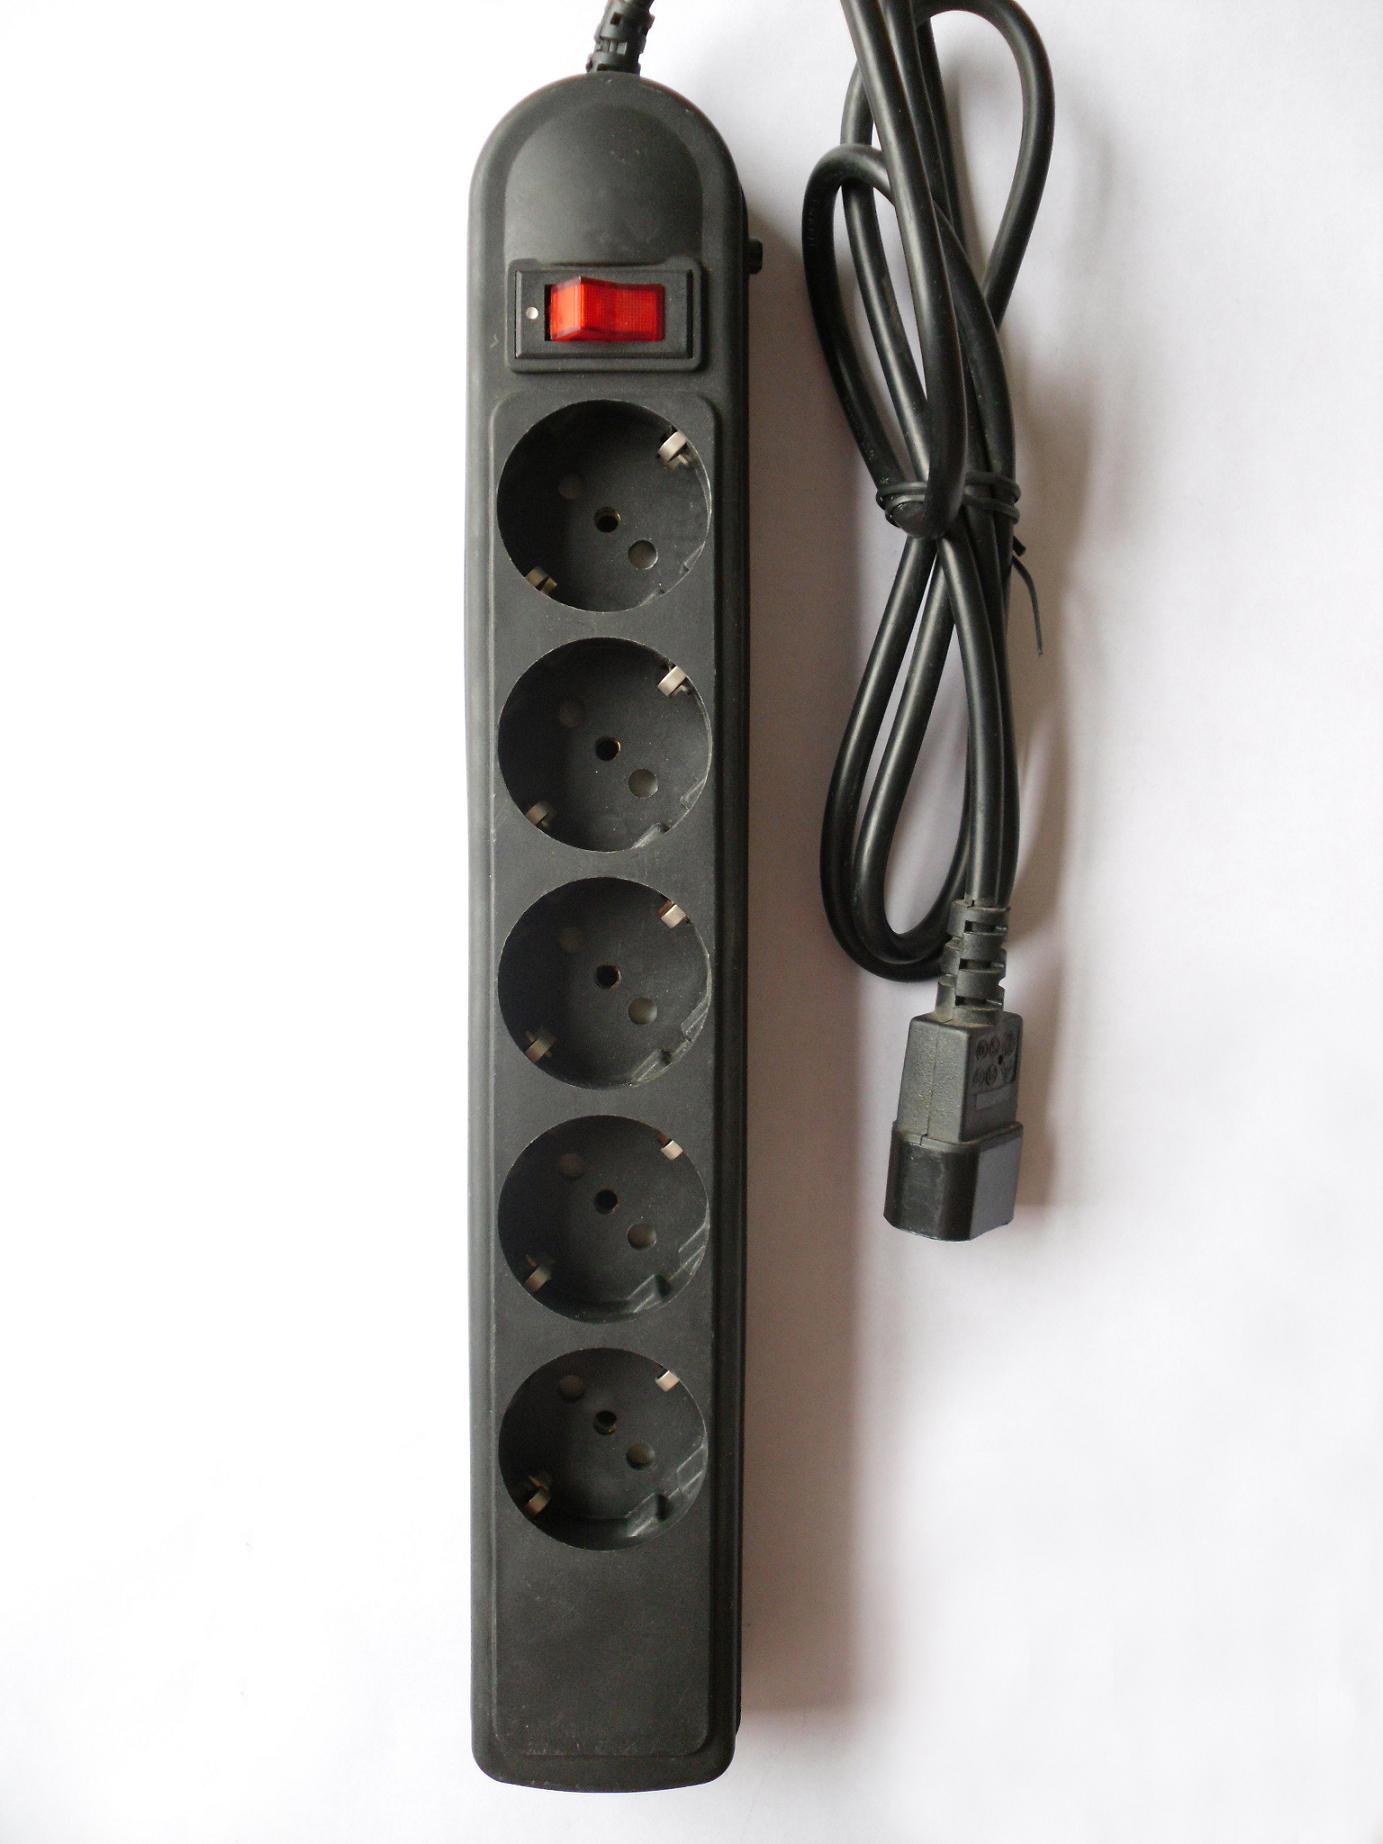 Power Socket with Surge Protection